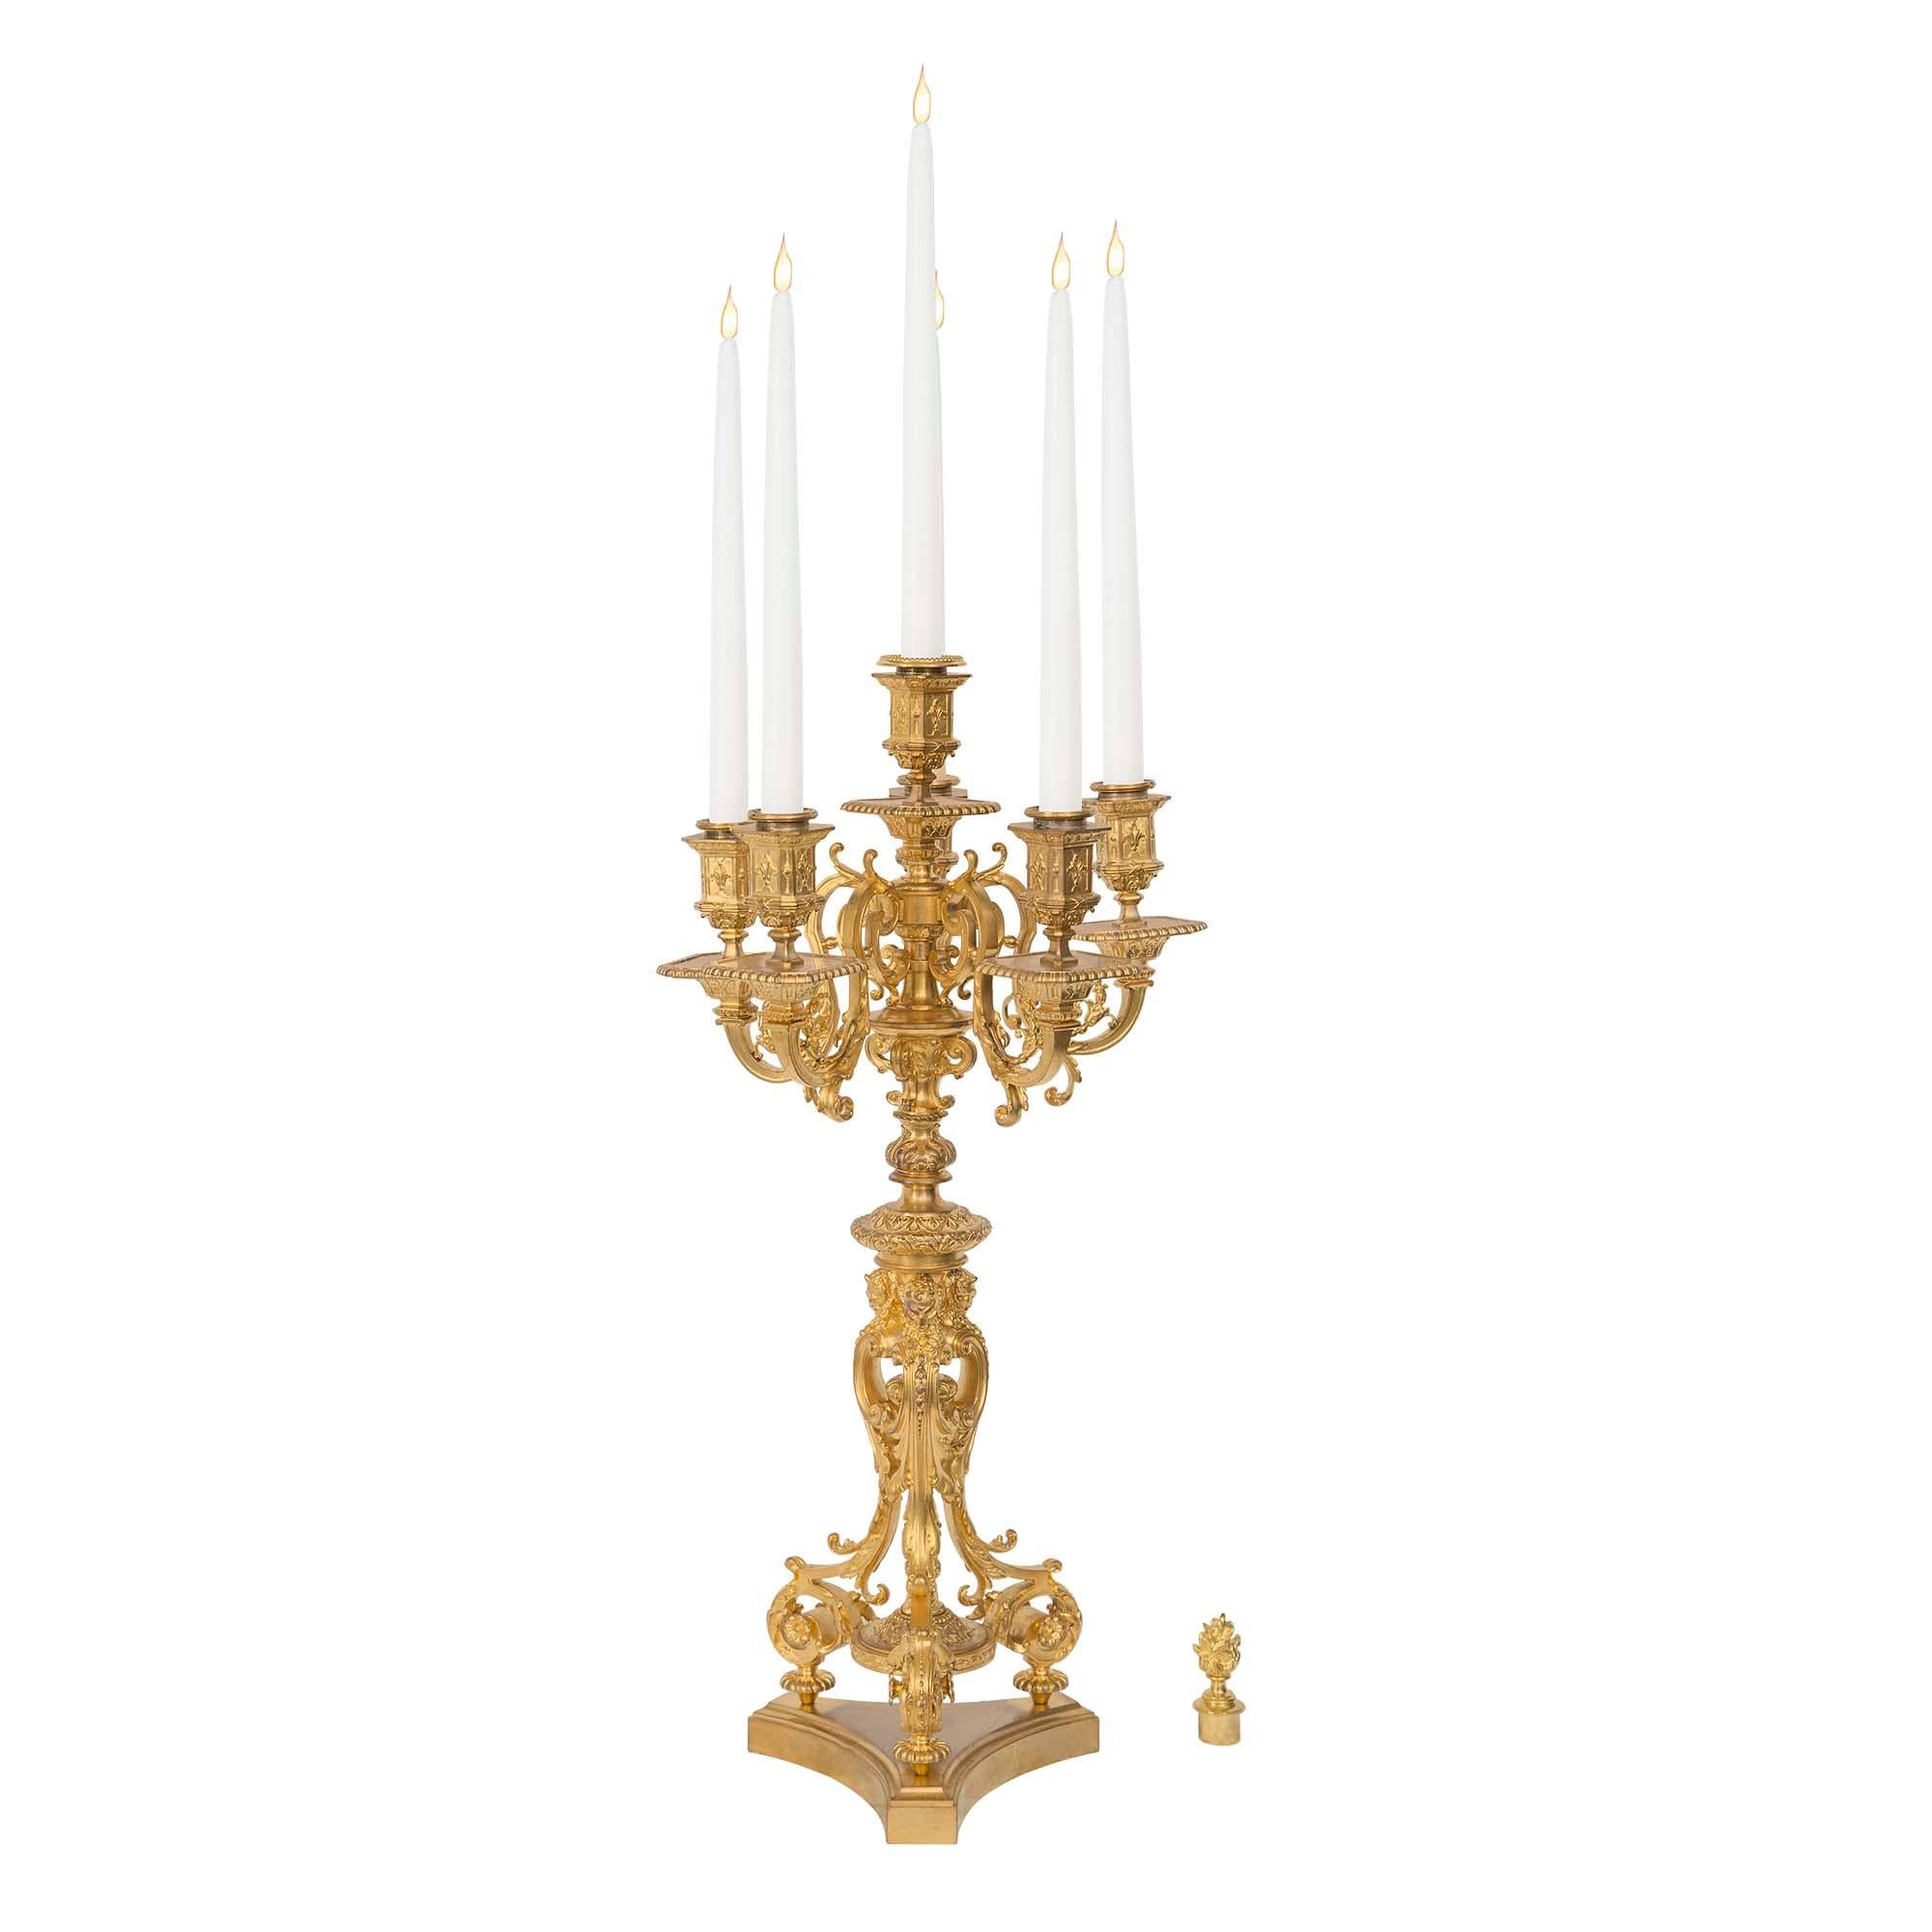 A stunning and high quality pair of French 19th century Renaissance st. ormolu six arm candelabras signed F. Barbedienne. Each candelabra is raised by a triangular base with concave sides and moulded edge. Above are three topie feet supporting